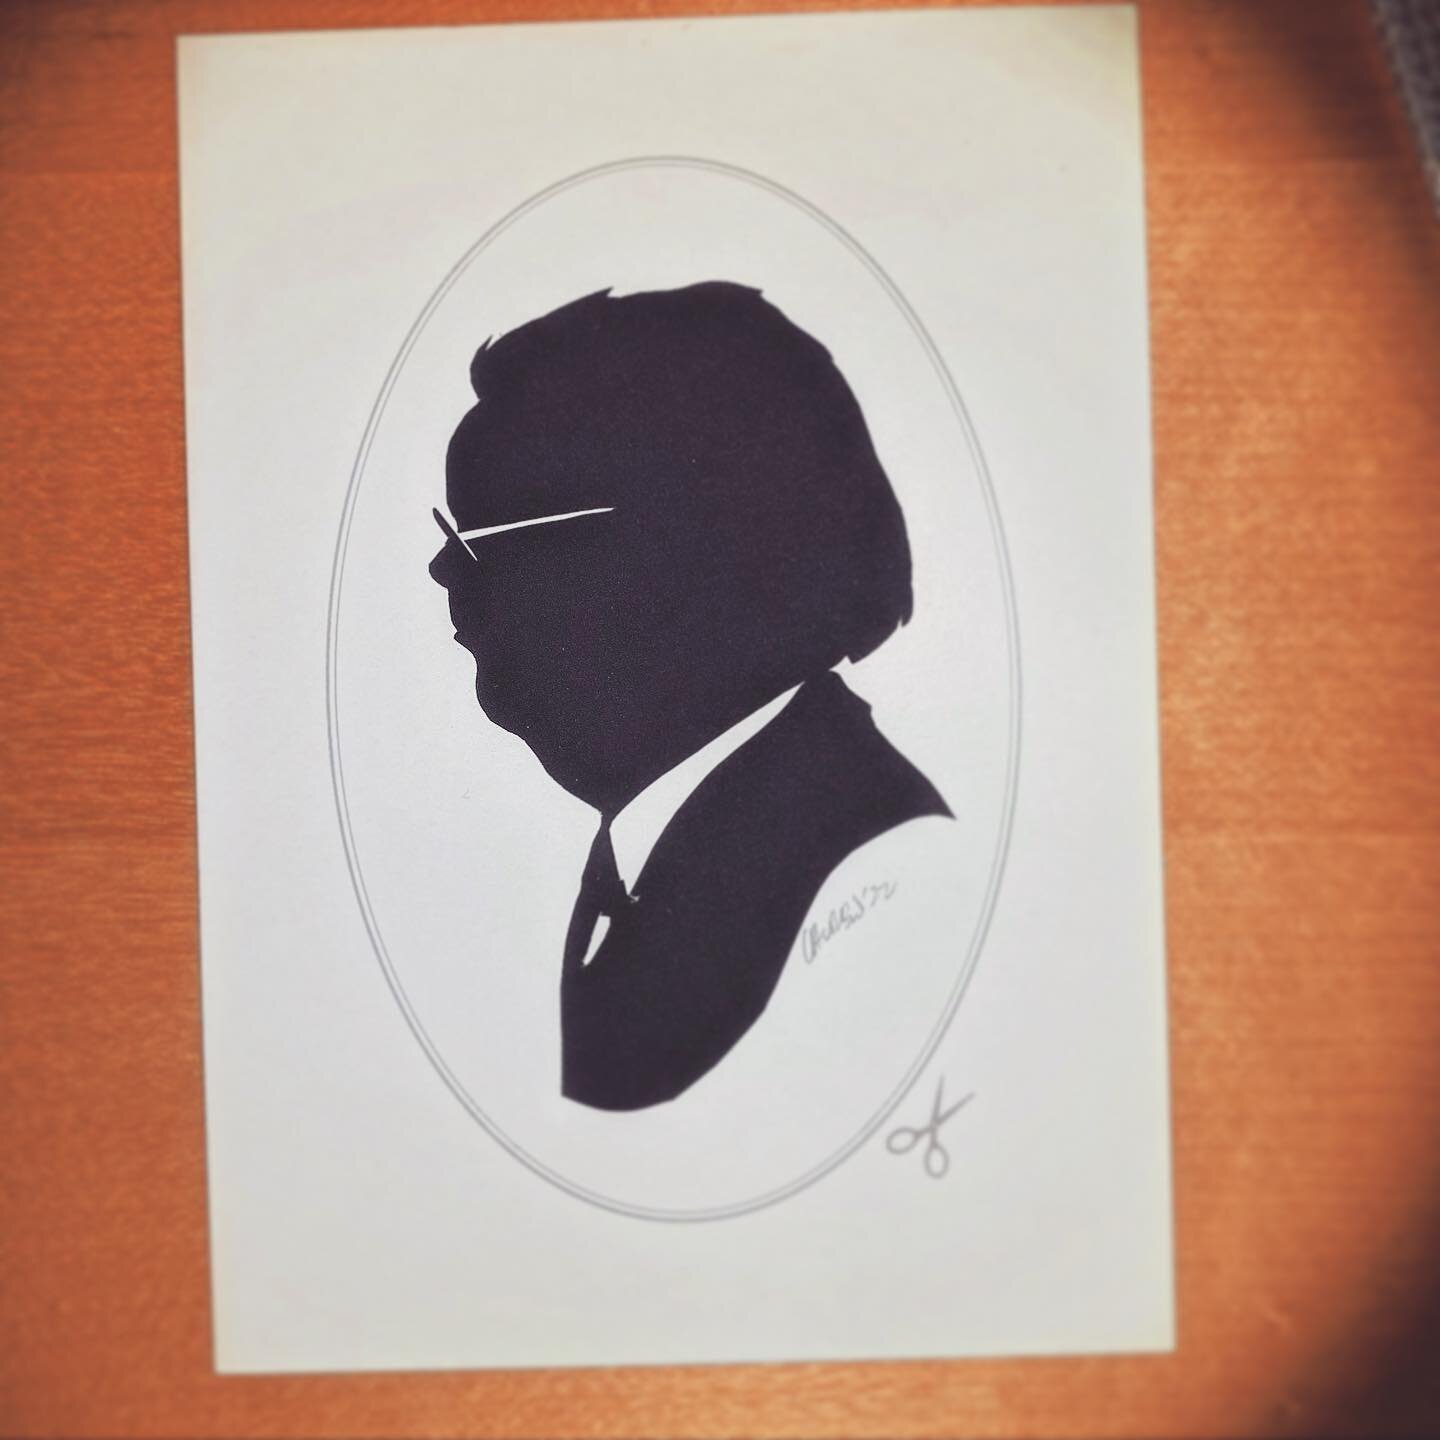 Every single human looks fantastic as a silhouette. Any age, any gender. 
.
Cut freehand with only ✂️ without drawing, tracing, shadows, or machine. 
.
Created live at a corporate celebration in Washington DC for @njimedia - in less than 120 seconds.